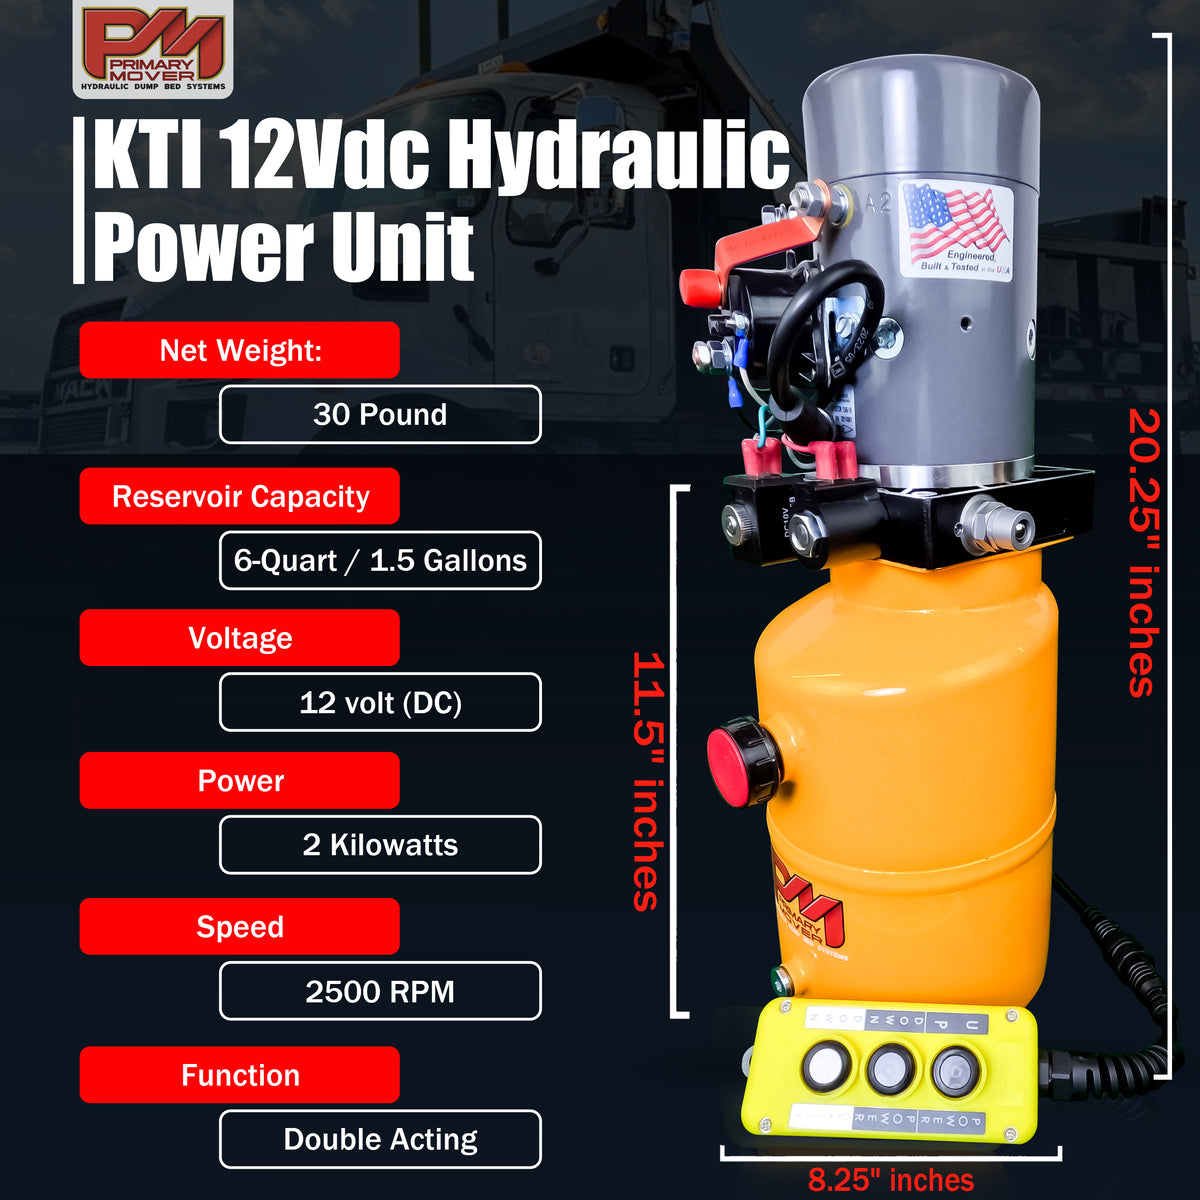 KTI 12V Double-Acting Hydraulic Pump - Steel Reservoir with red and black buttons and a rugged, compact design for heavy-duty hydraulic dump bed systems.